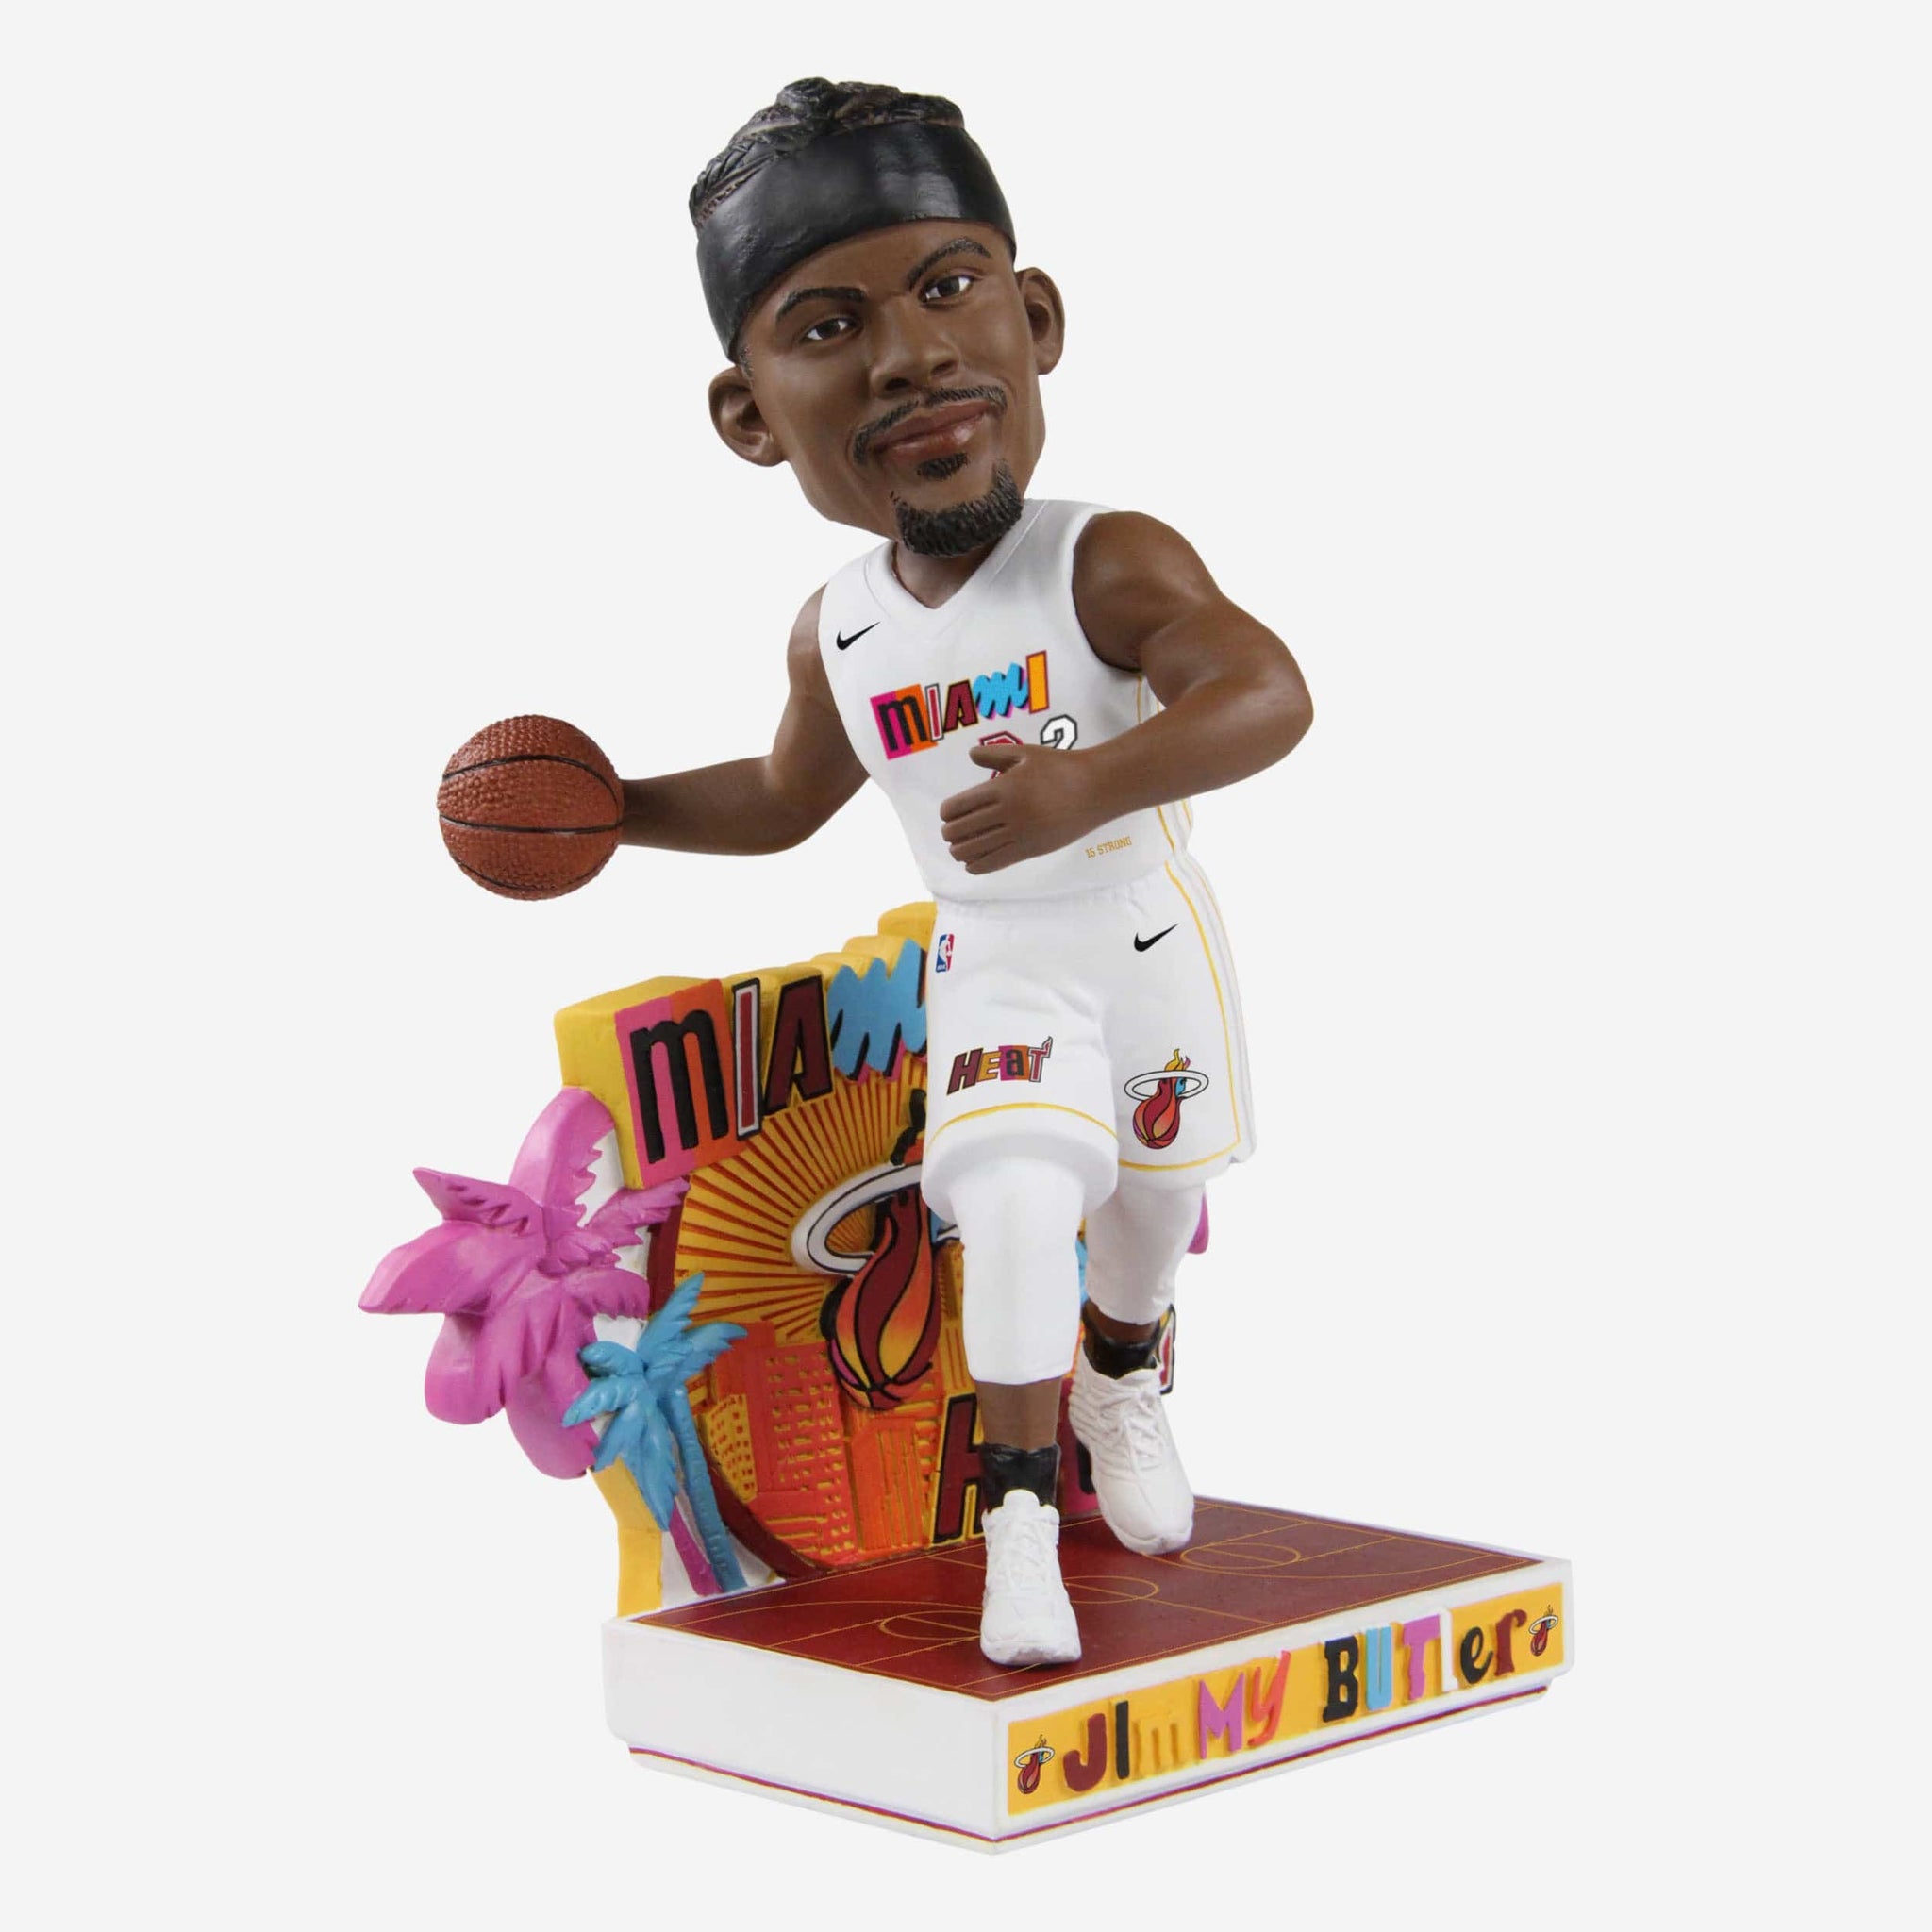 Fans need these Miami Heat City Edition bobbleheads